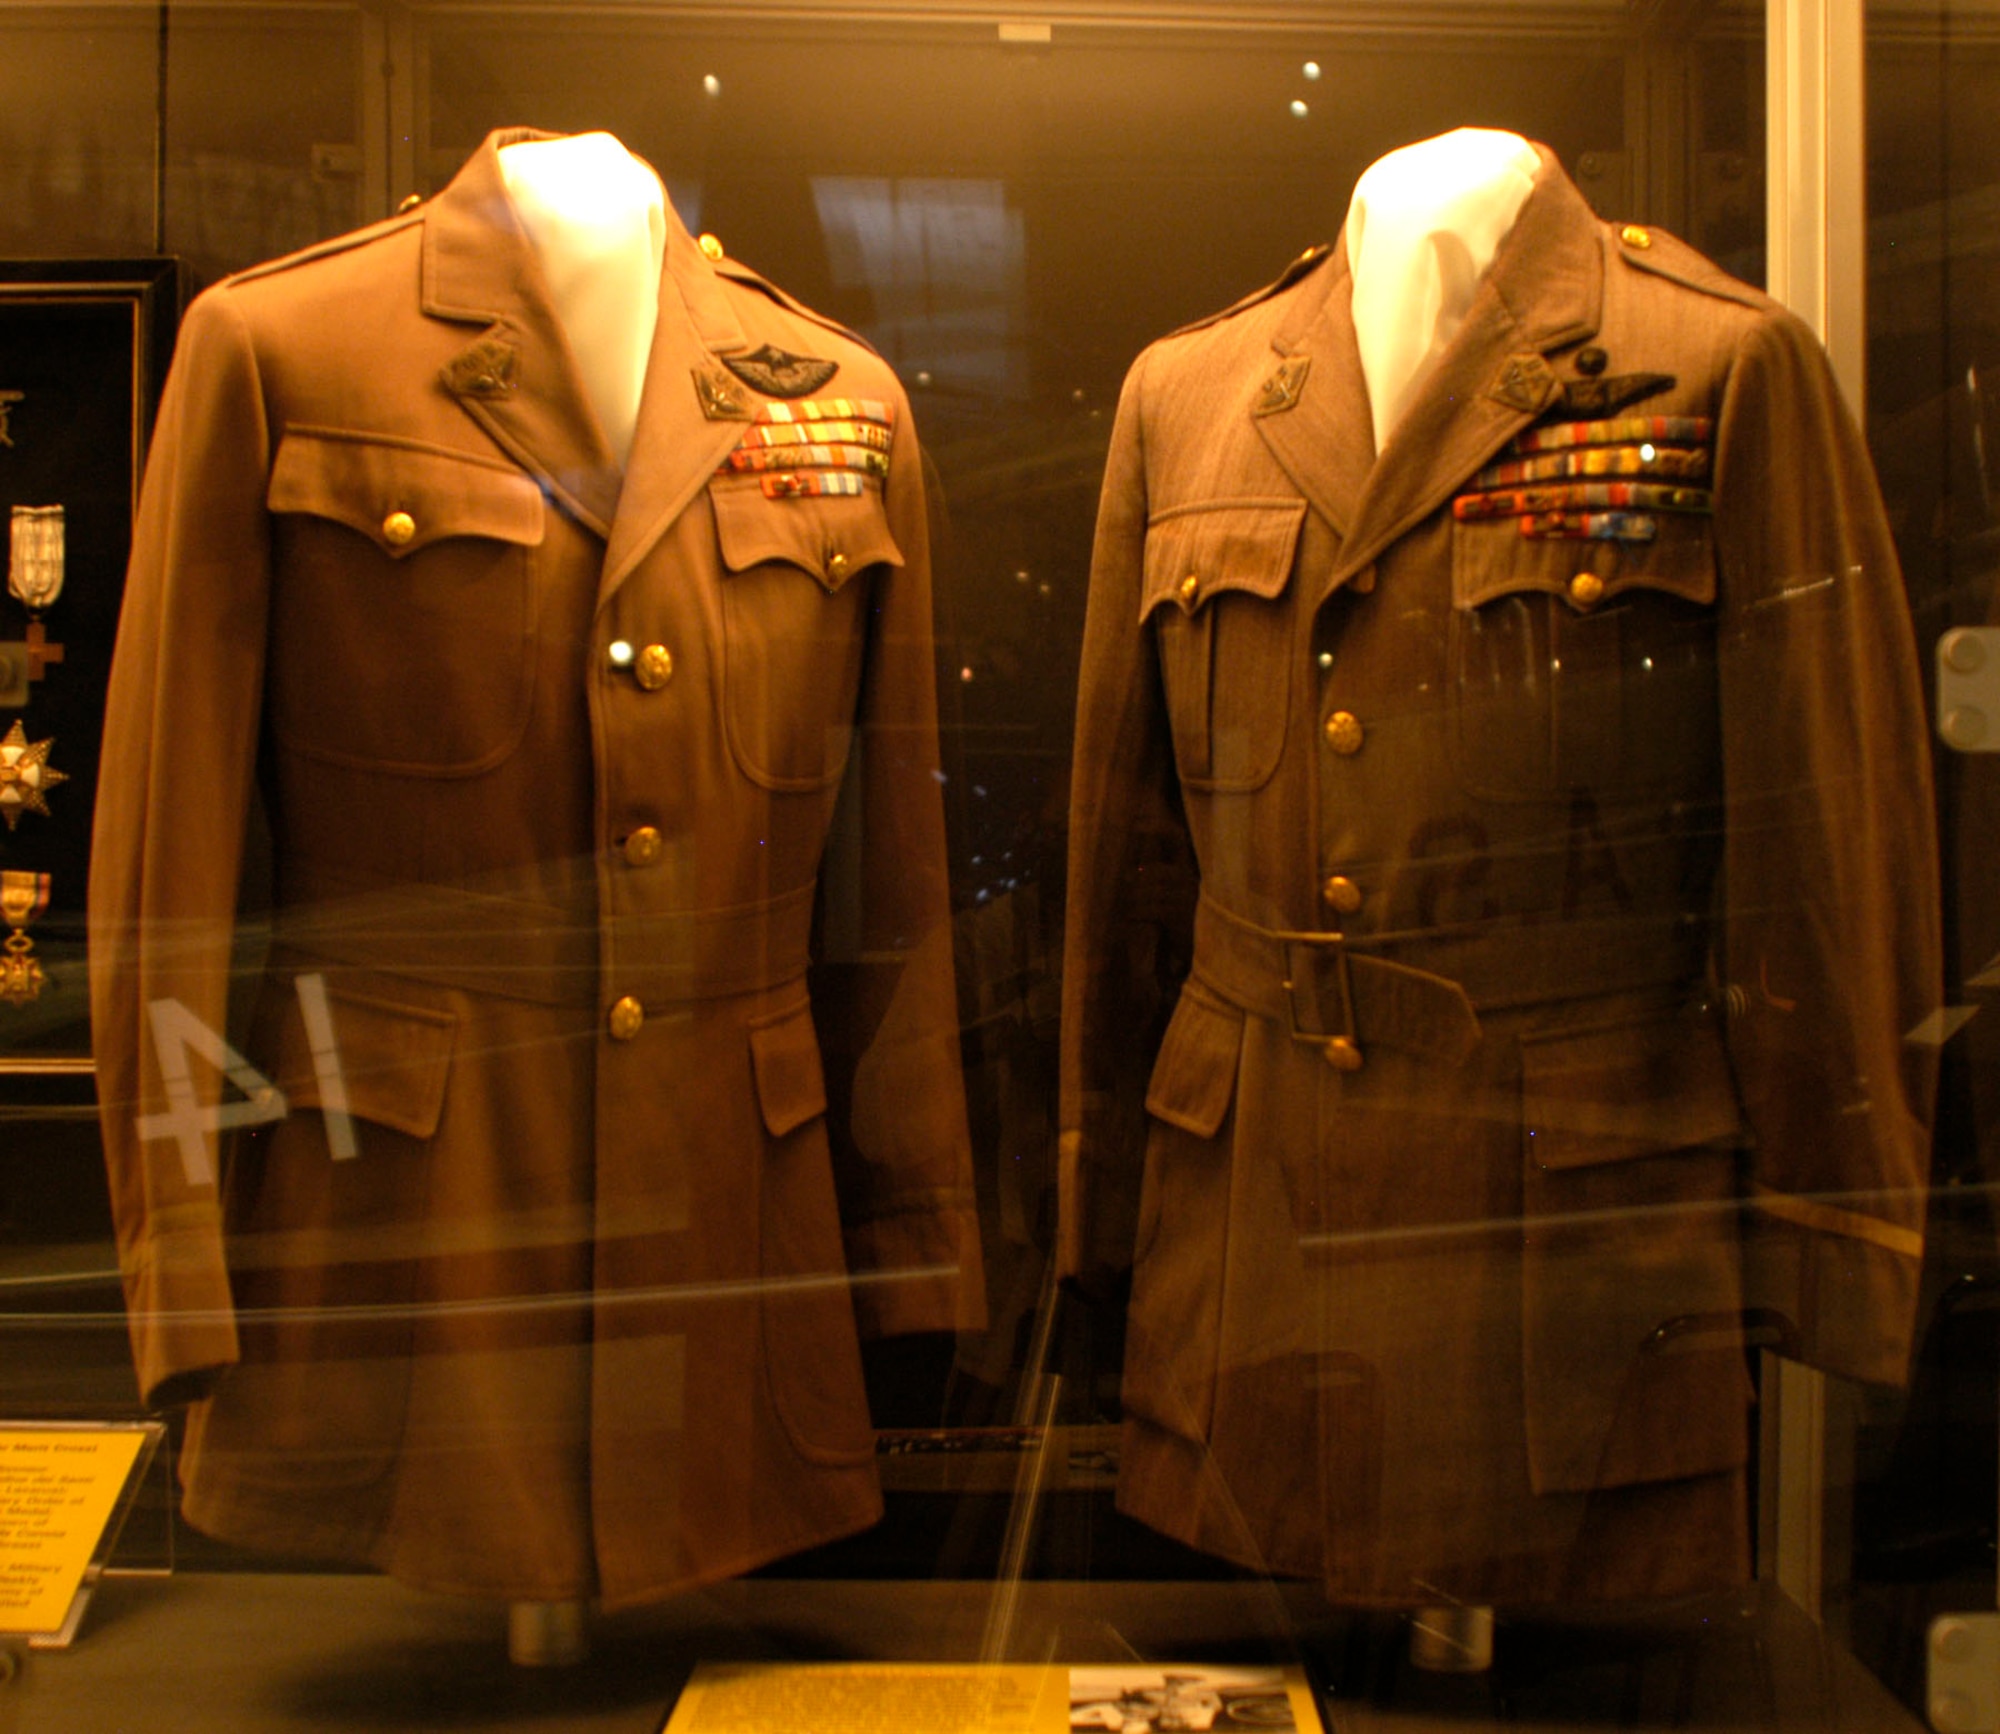 DAYTON, Ohio - Gen. Billy Mitchell's jackets on display in the Early Years Gallery at the National Museum of the U.S. Air Force. The jacket on the right is a non-regulation lapel collar jacket tailored for Gen. Billy Mitchell in July 1923. The jacket on the left is the non-regulation lapel collar jacket tailored for Mitchell in November 1924. This jacket is possibly the one worn by Mitchell during his court martial in December 1925. (U.S. Air Force photo)